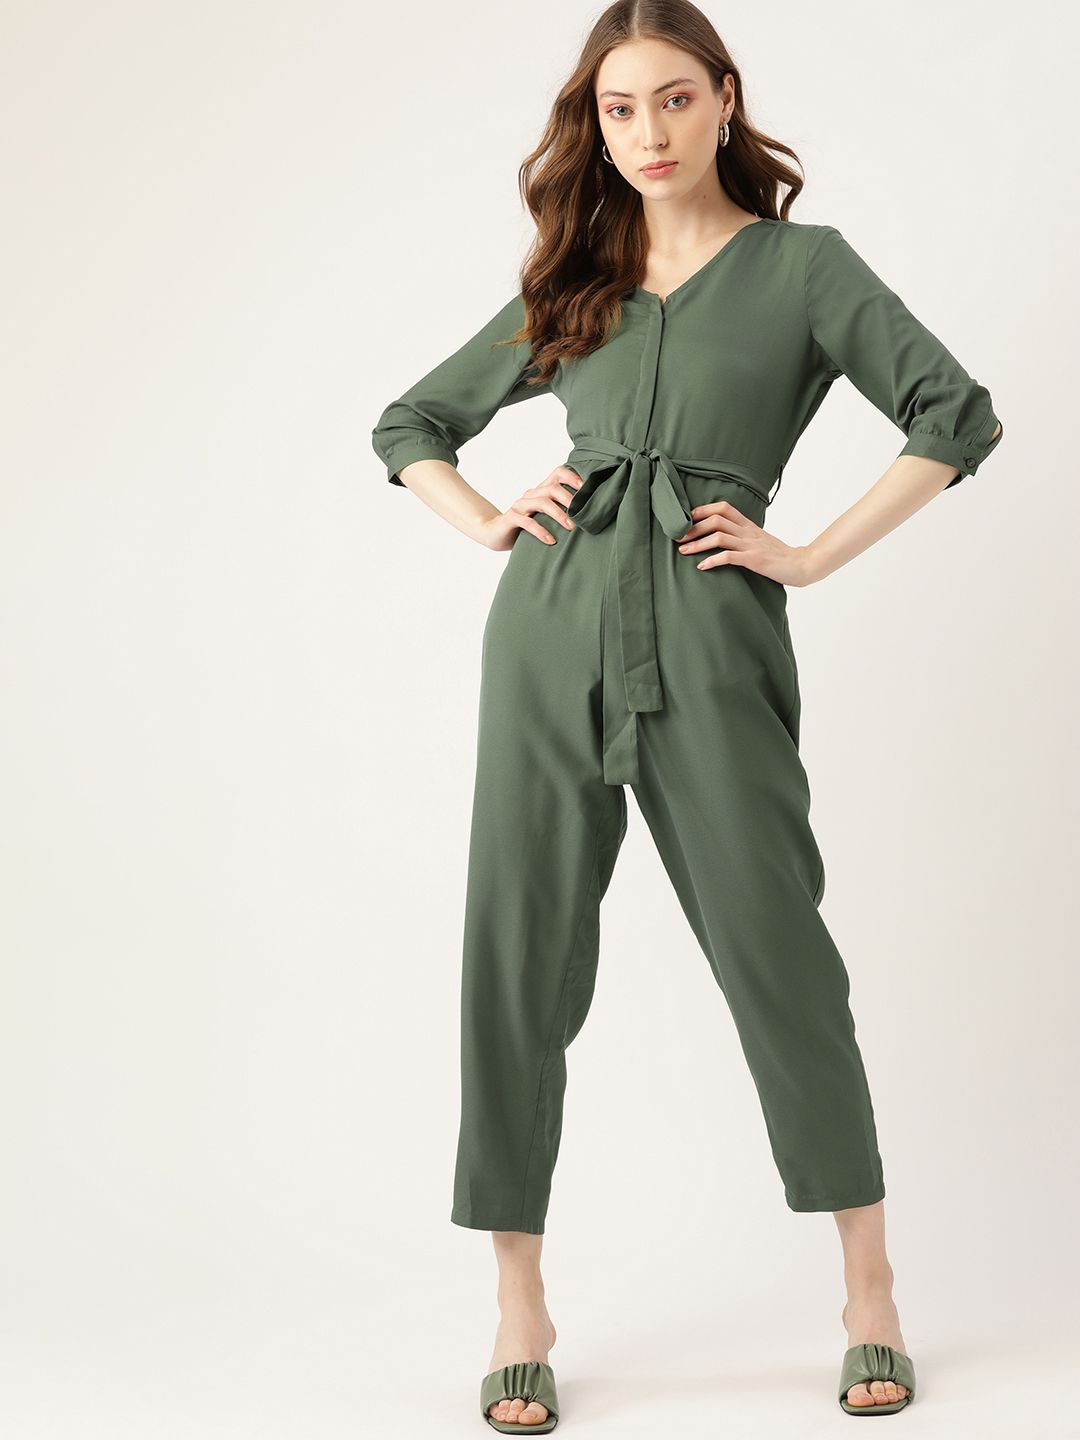 DressBerry Olive Green Cropped Basic Jumpsuit With Waist Tie-Ups Price in India